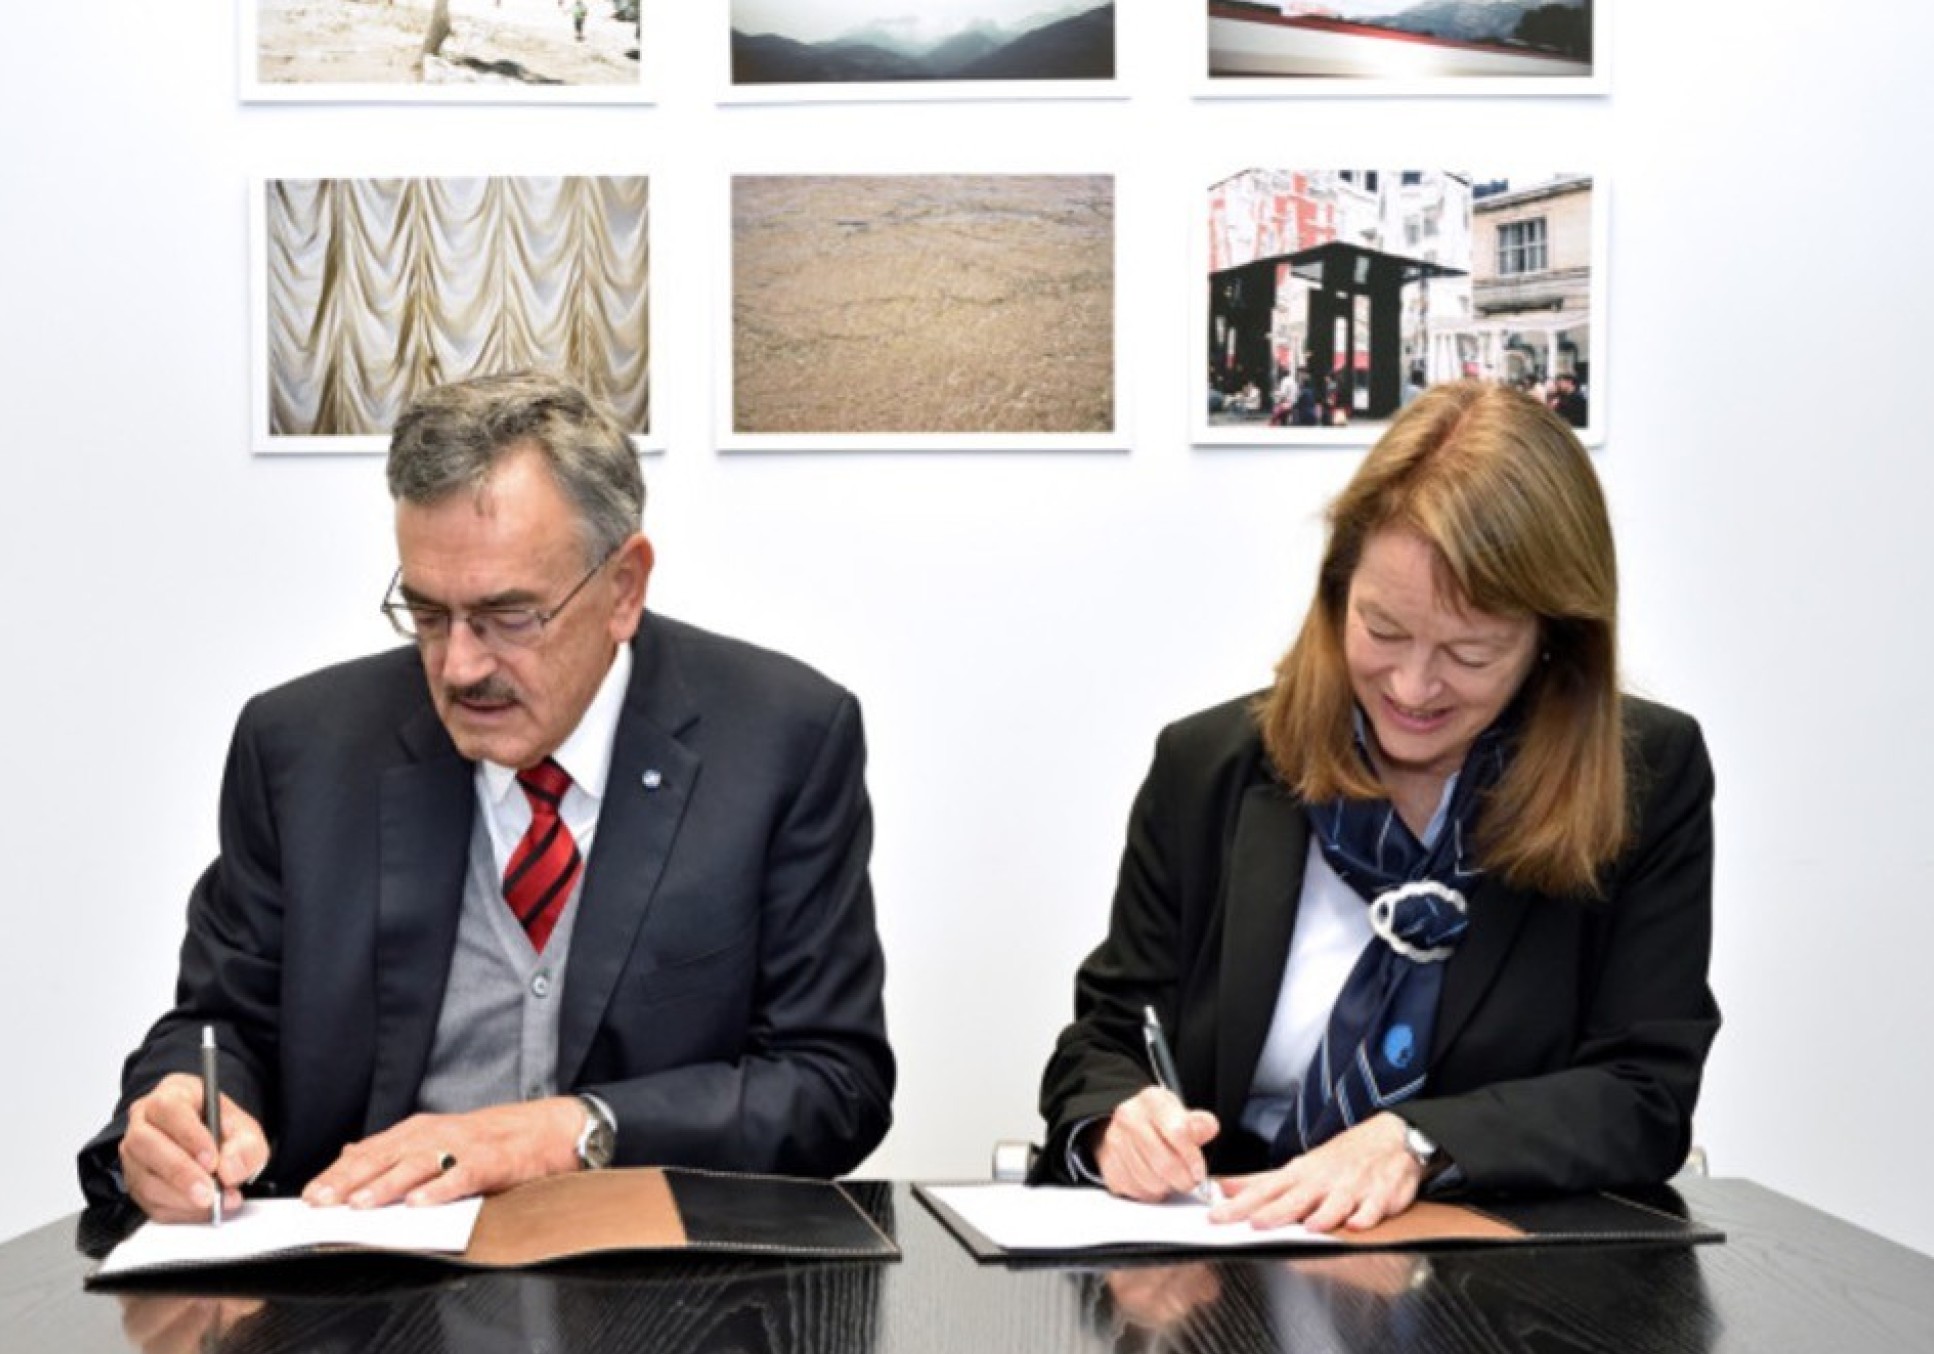 Professor Alice Gast, President of Imperial, and Professor Wolfgang Herrman, then President of TUM, signed the partnership in early 2019